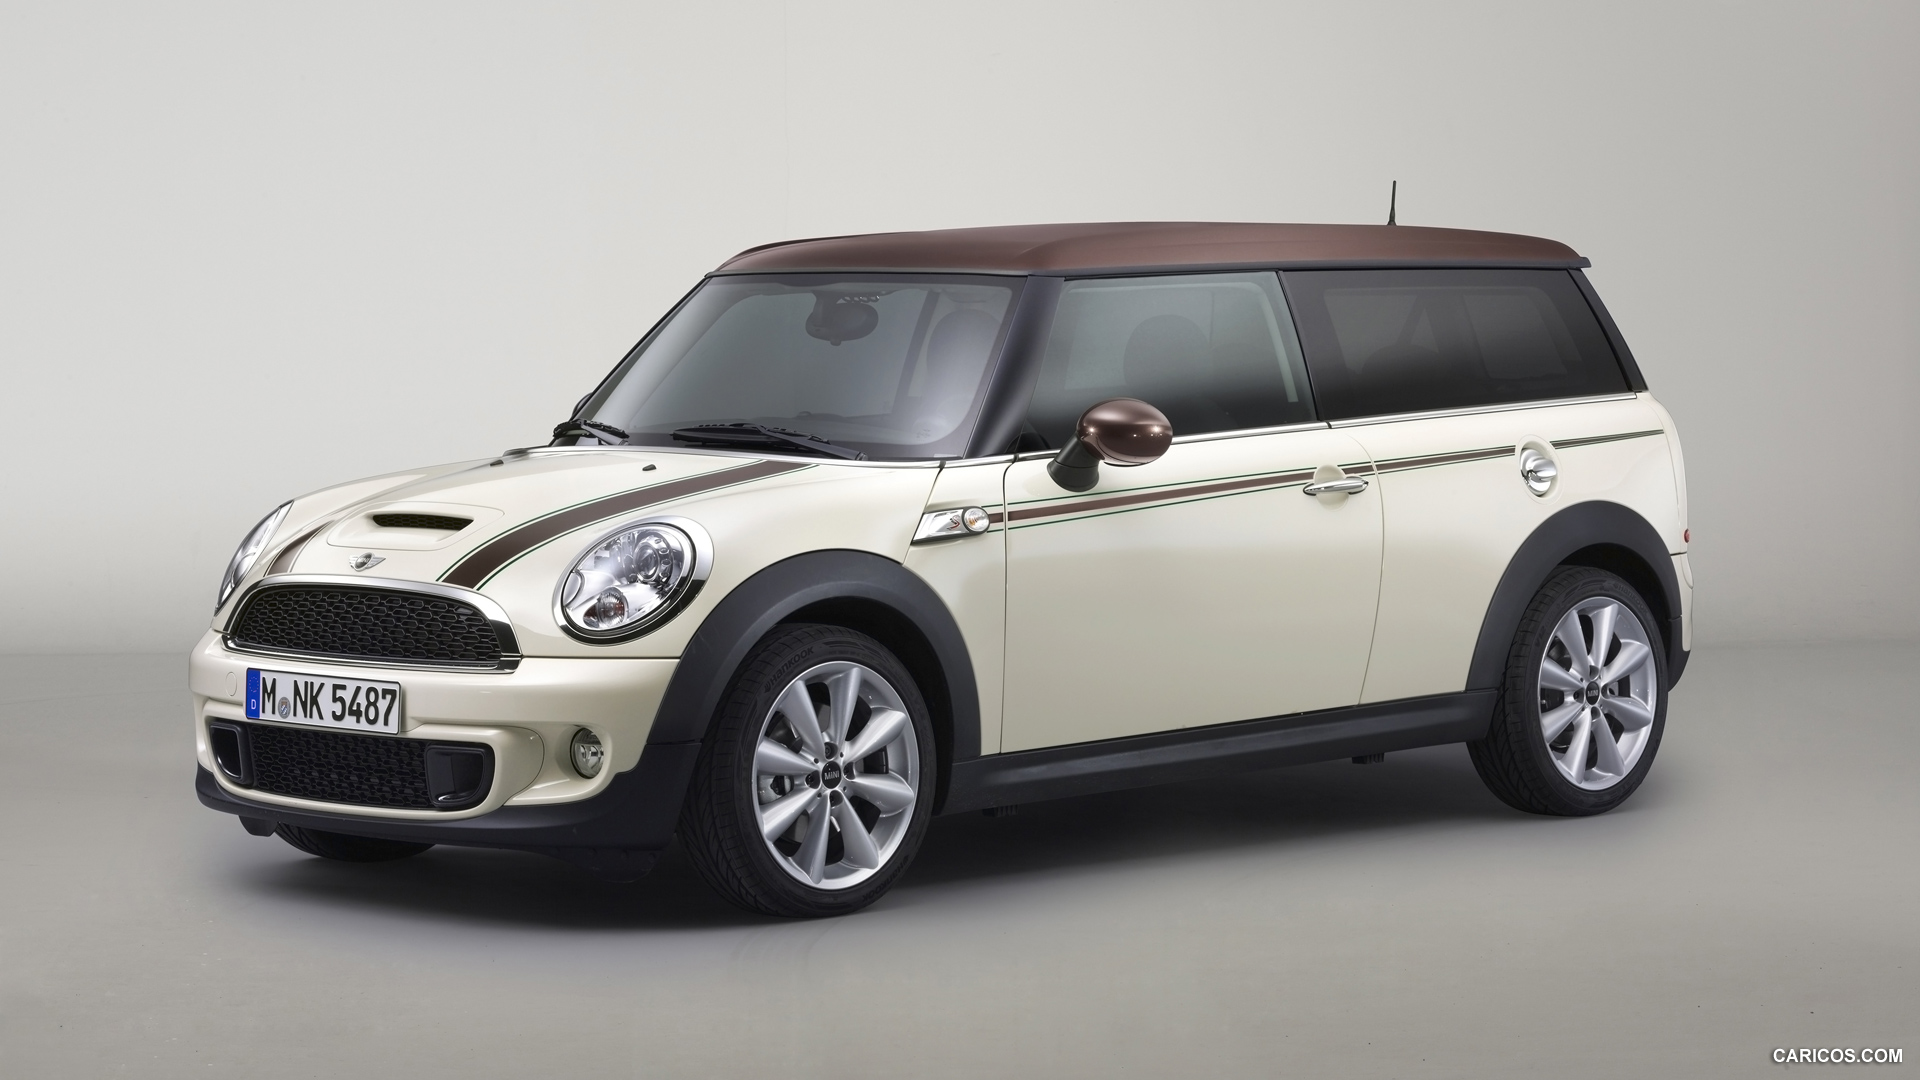  MINI Clubman Hyde Park (2013) - Front, #10 of 23